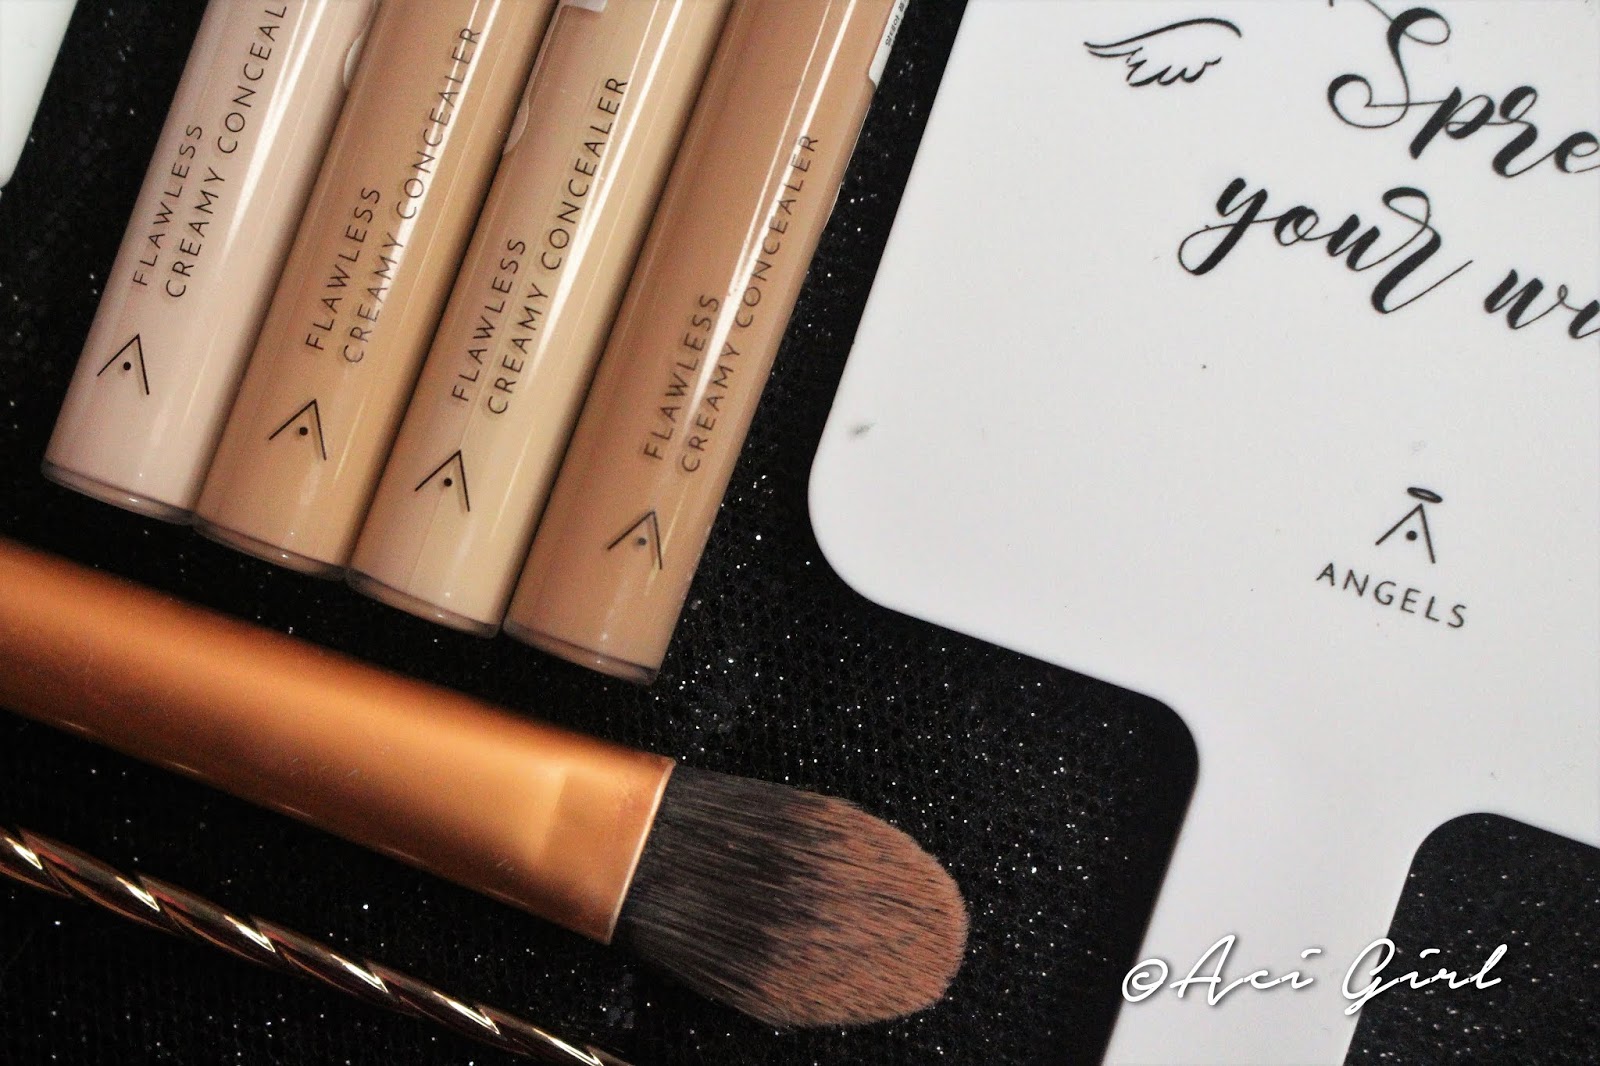 Althea Flawless Creamy Concealer